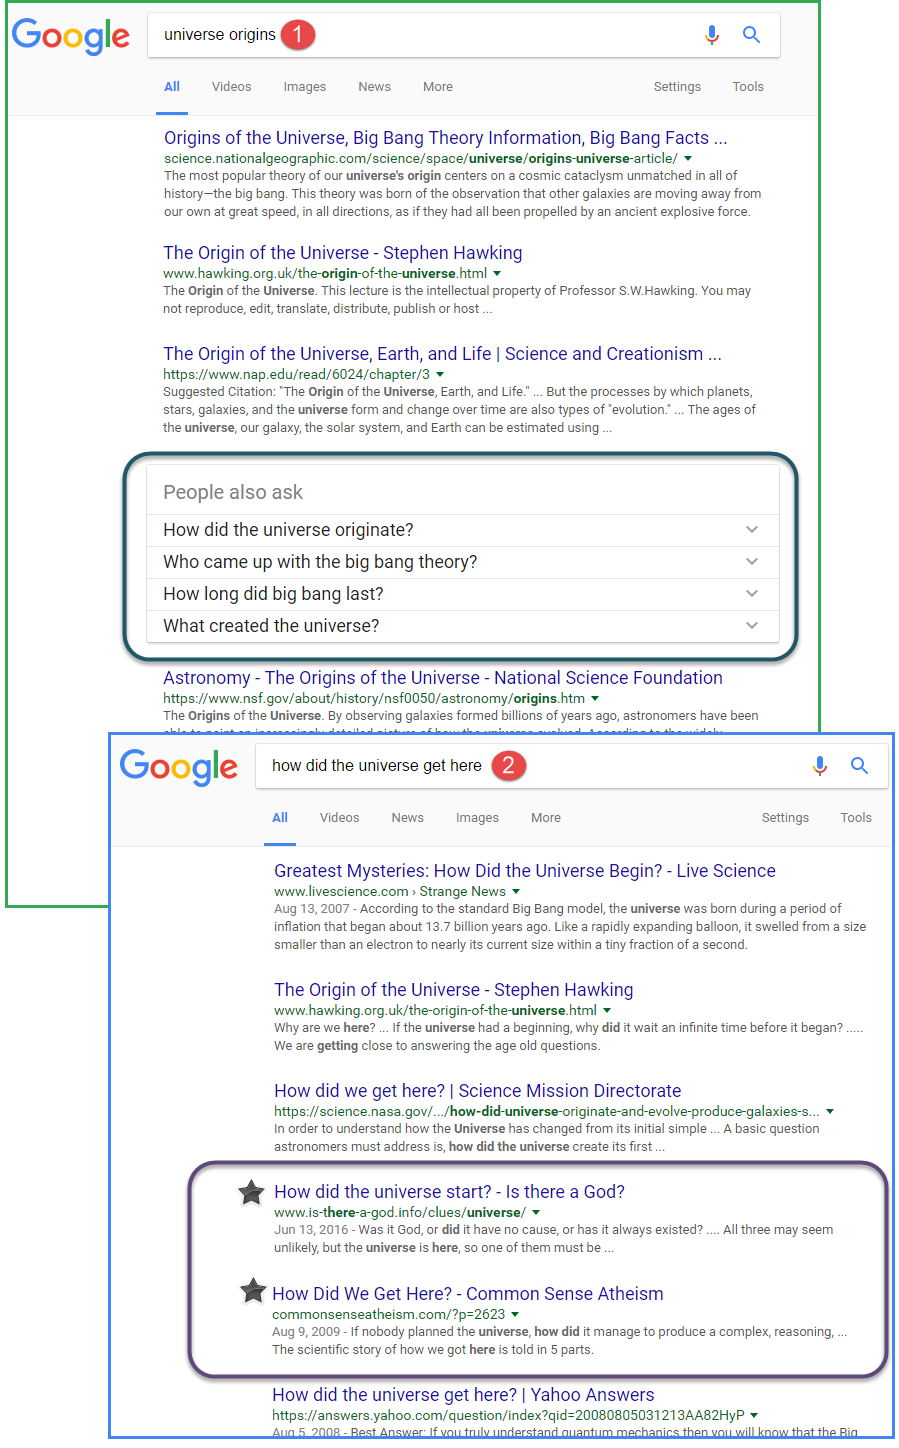 Traditional Results vs. Voice Search Results 